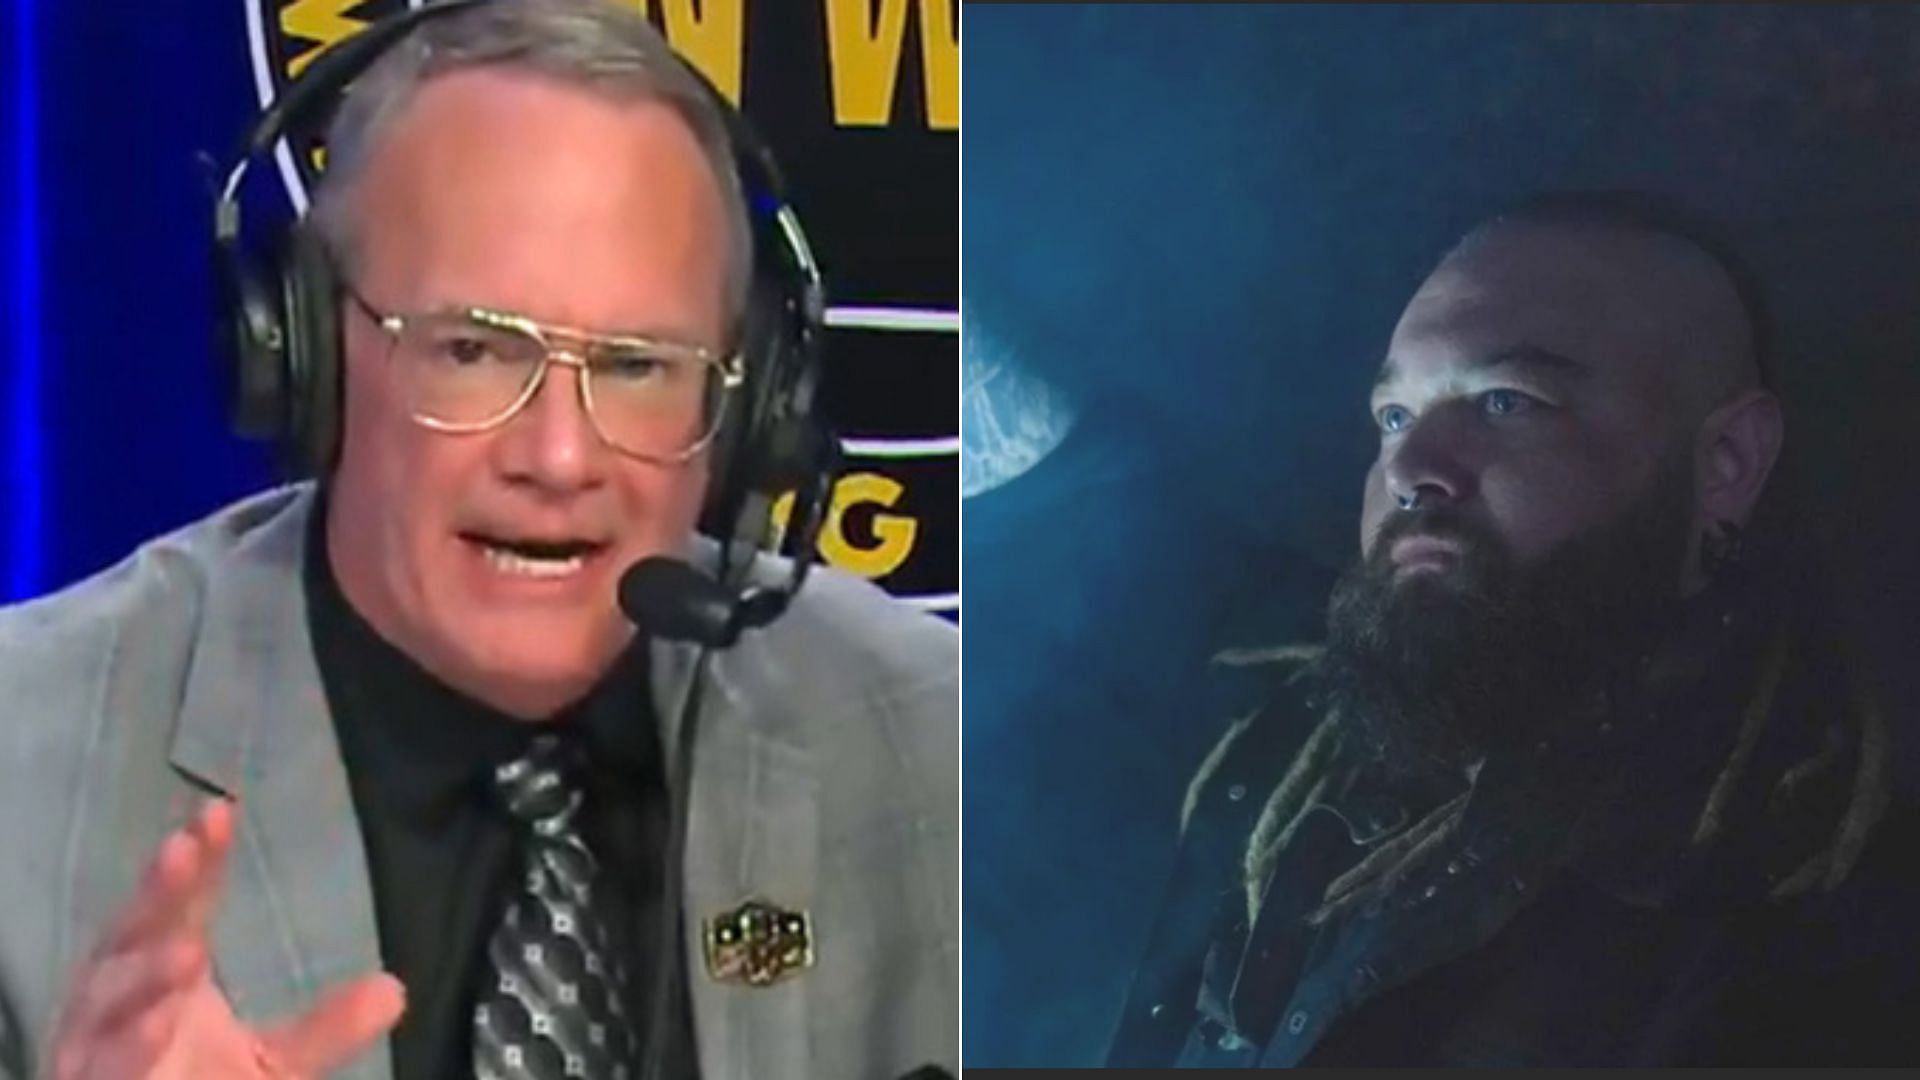 Jim Cornette is not a fan of Bray Wyatt and his gimmick